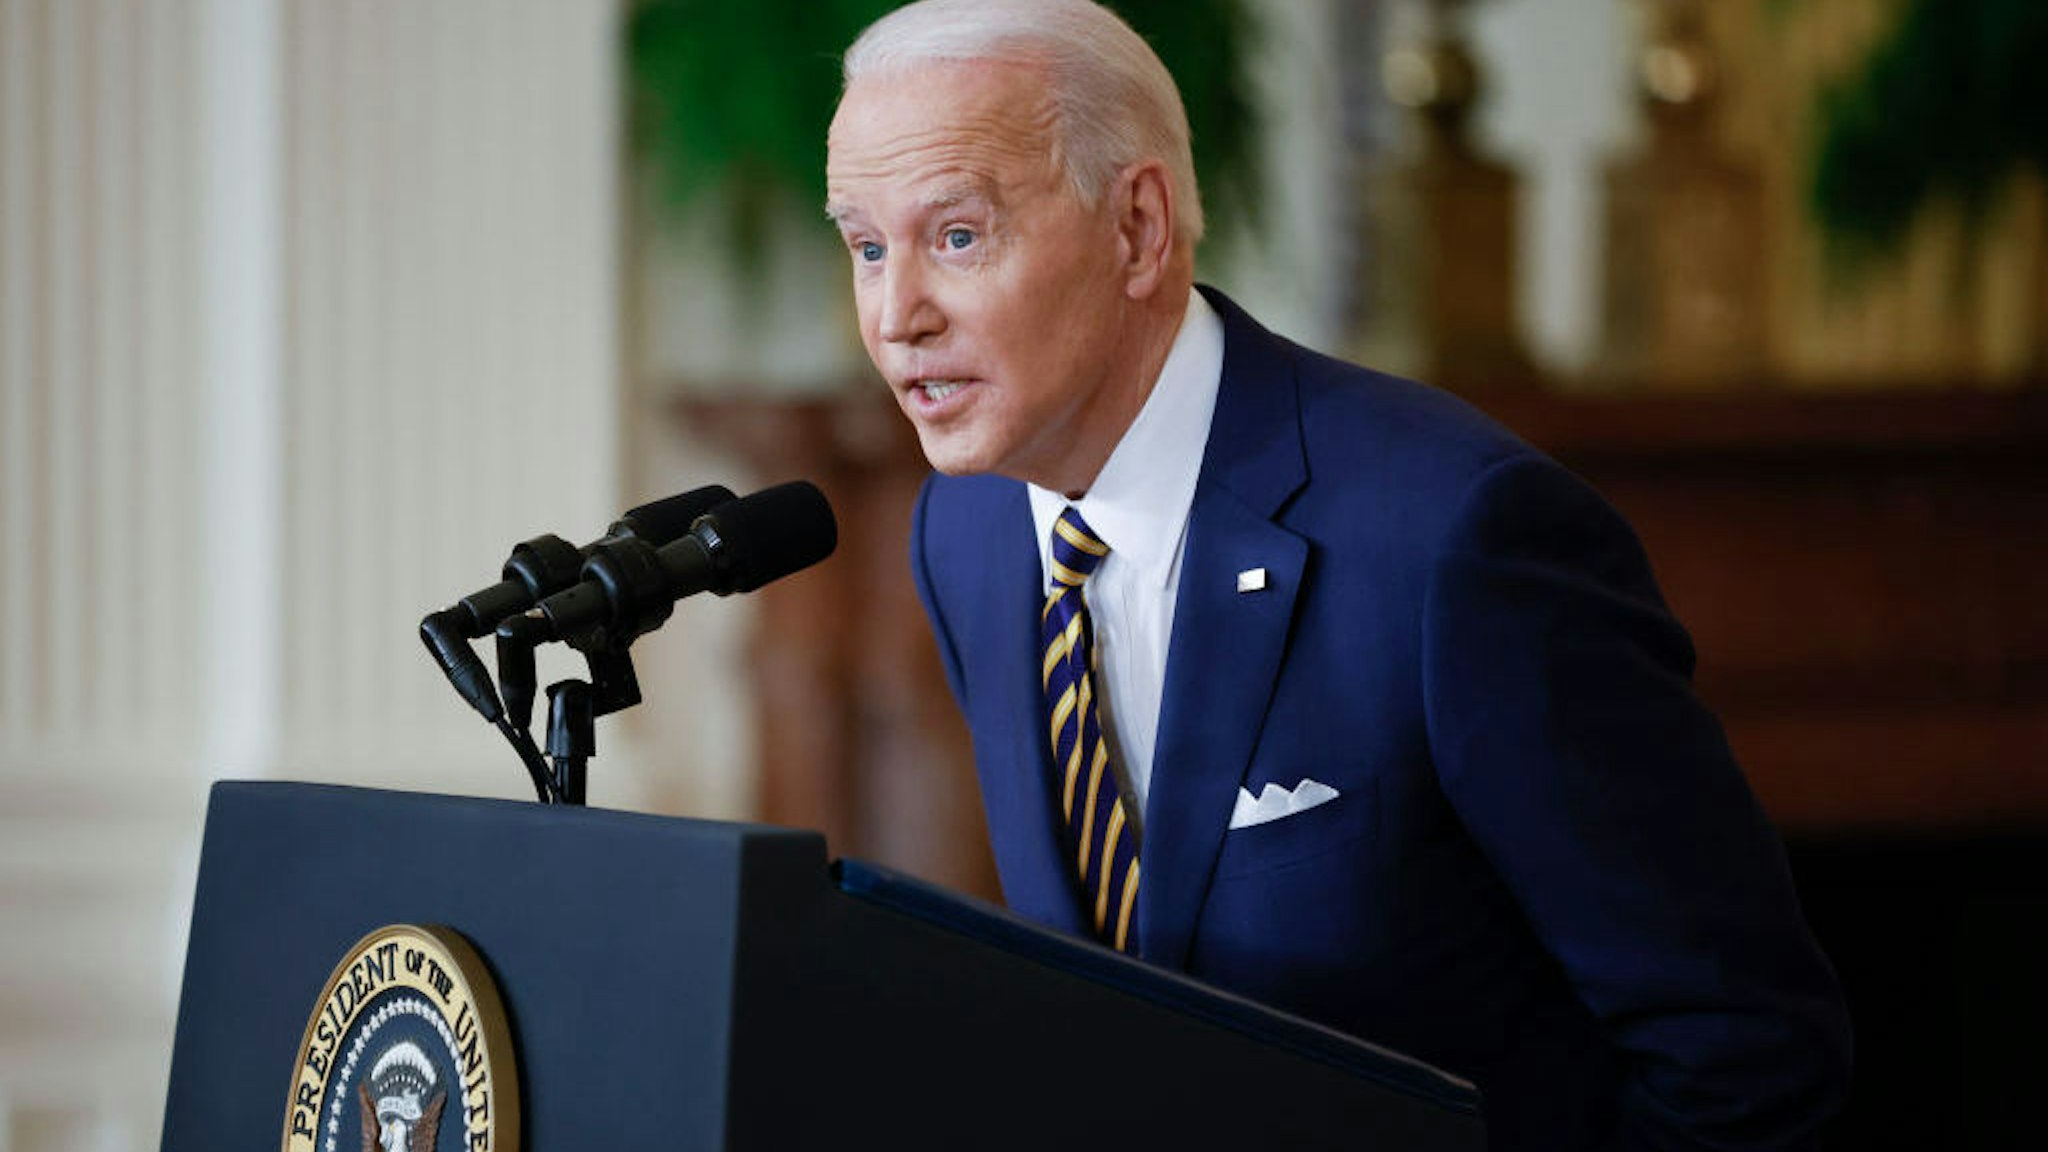 WASHINGTON, DC - JANUARY 19: U.S. President Joe Biden answers questions during a news conference in the East Room of the White House on January 19, 2022 in Washington, DC. With his approval rating hovering around 42-percent, Biden is approaching the end of his first year in the Oval Office with inflation rising, COVID-19 surging and his legislative agenda stalled on Capitol Hill. (Photo by Chip Somodevilla/Getty Images)